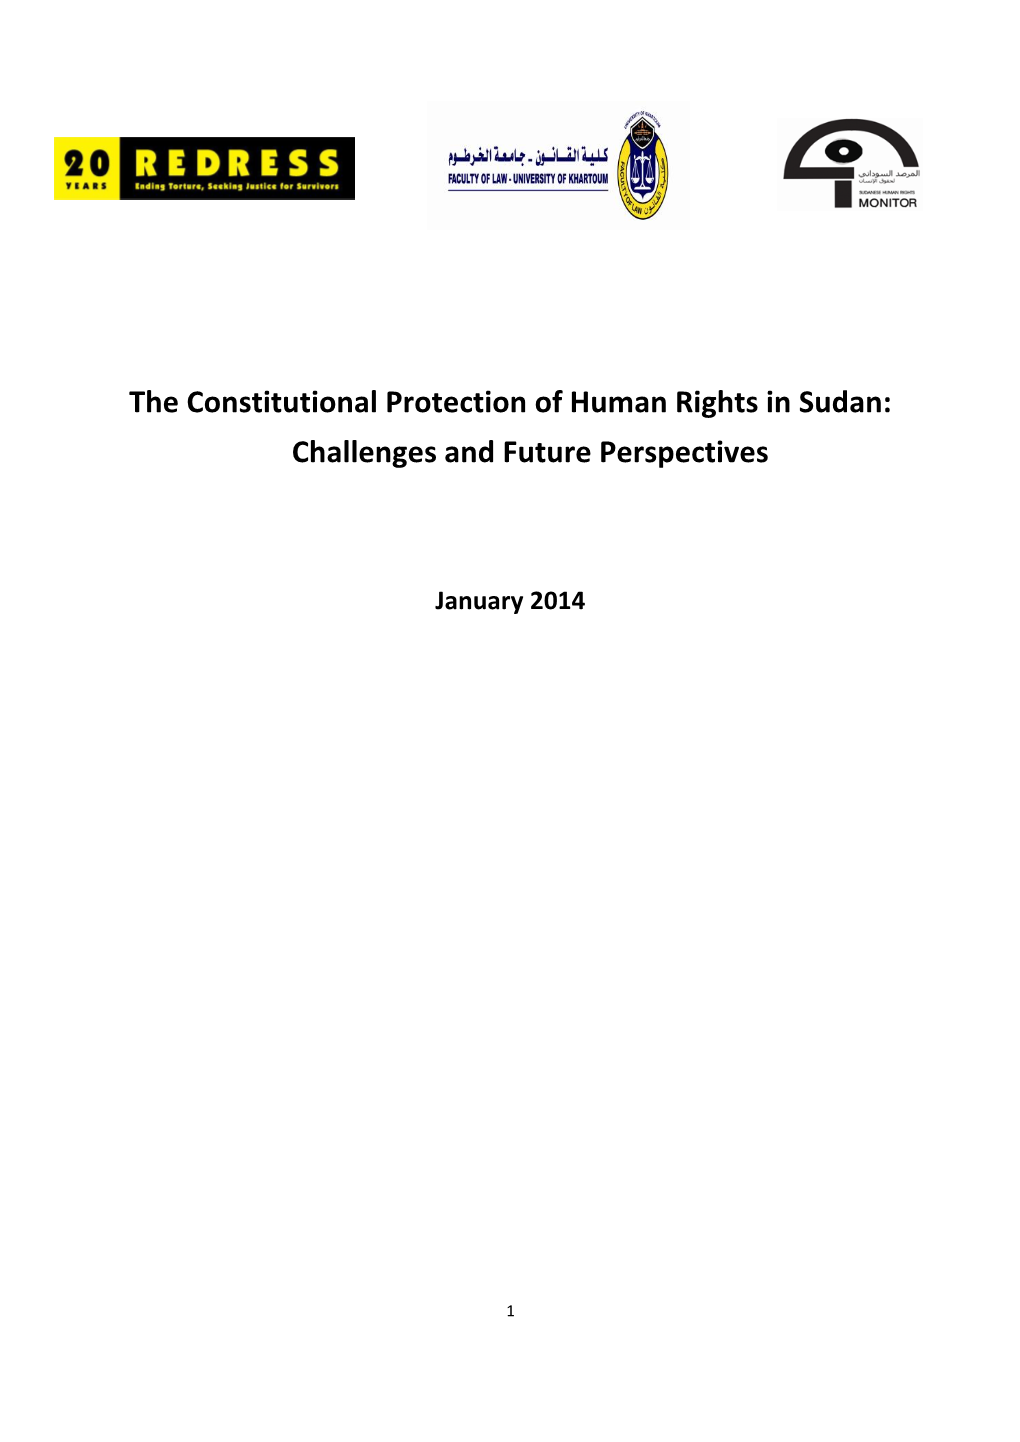 The Constitutional Protection of Human Rights in Sudan: Challenges and Future Perspectives